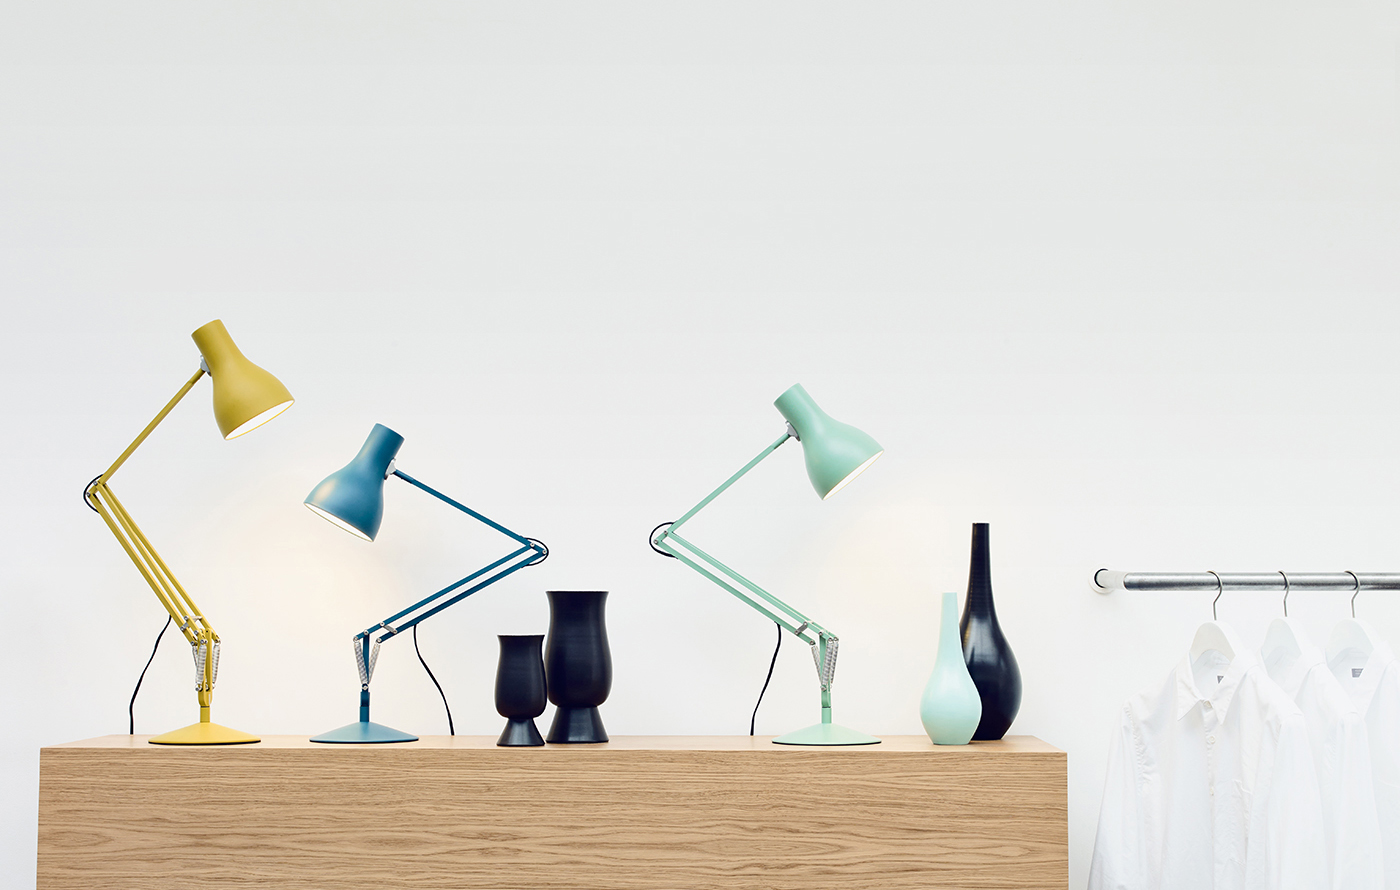 Type 75 Desk lamp by Anglepoise, colors by Margaret Howell